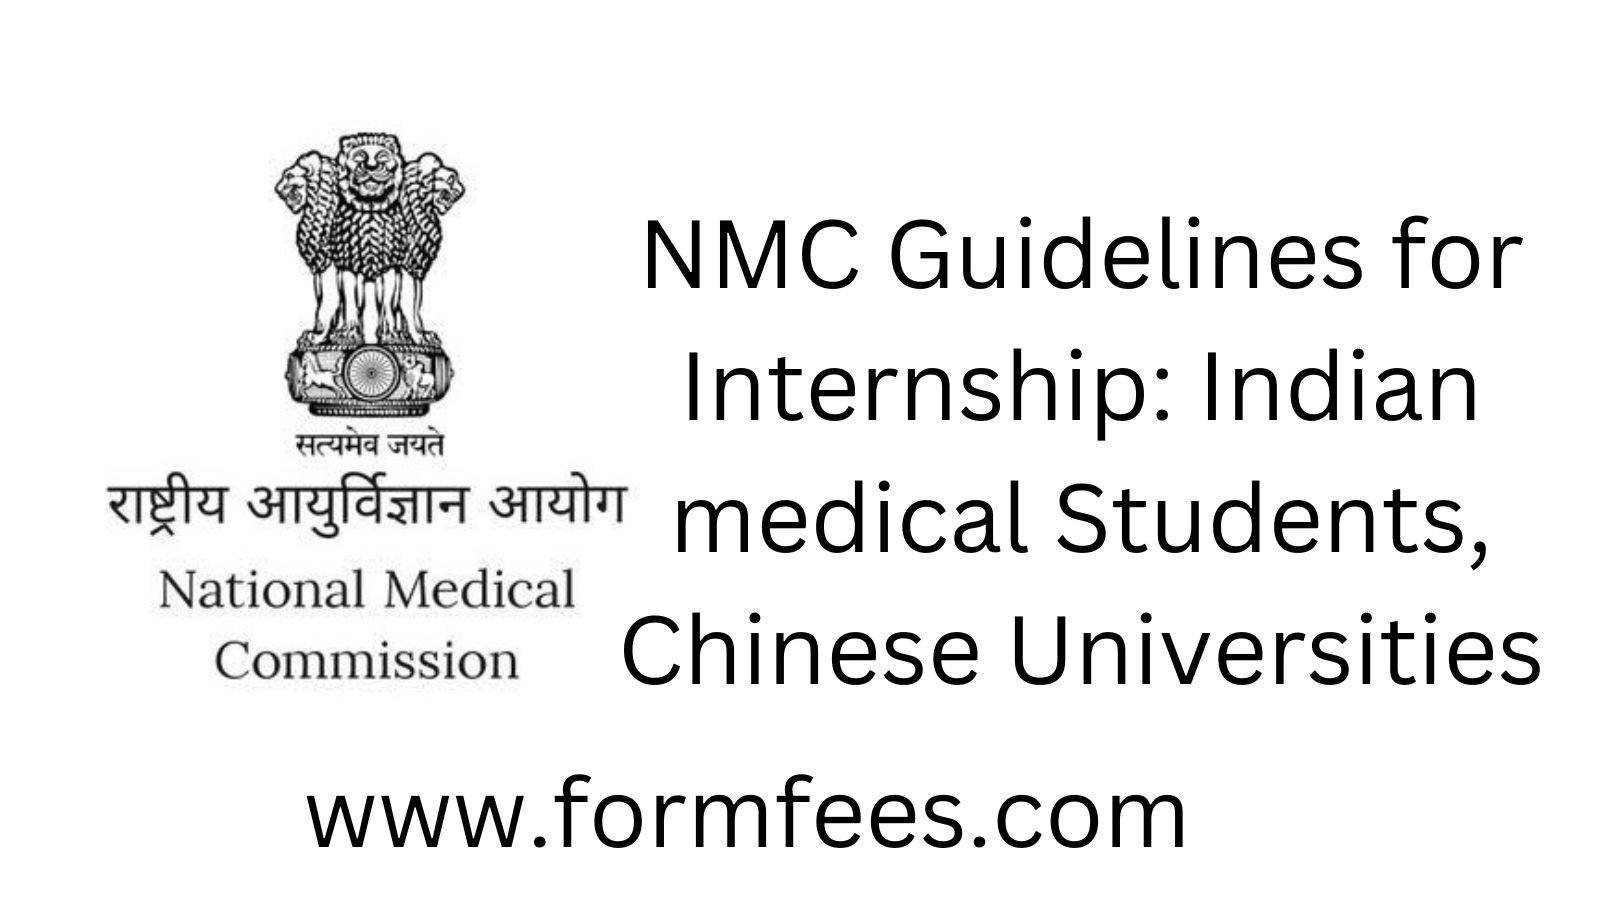 NMC Guidelines for Internship Indian medical Students Chinese Universities